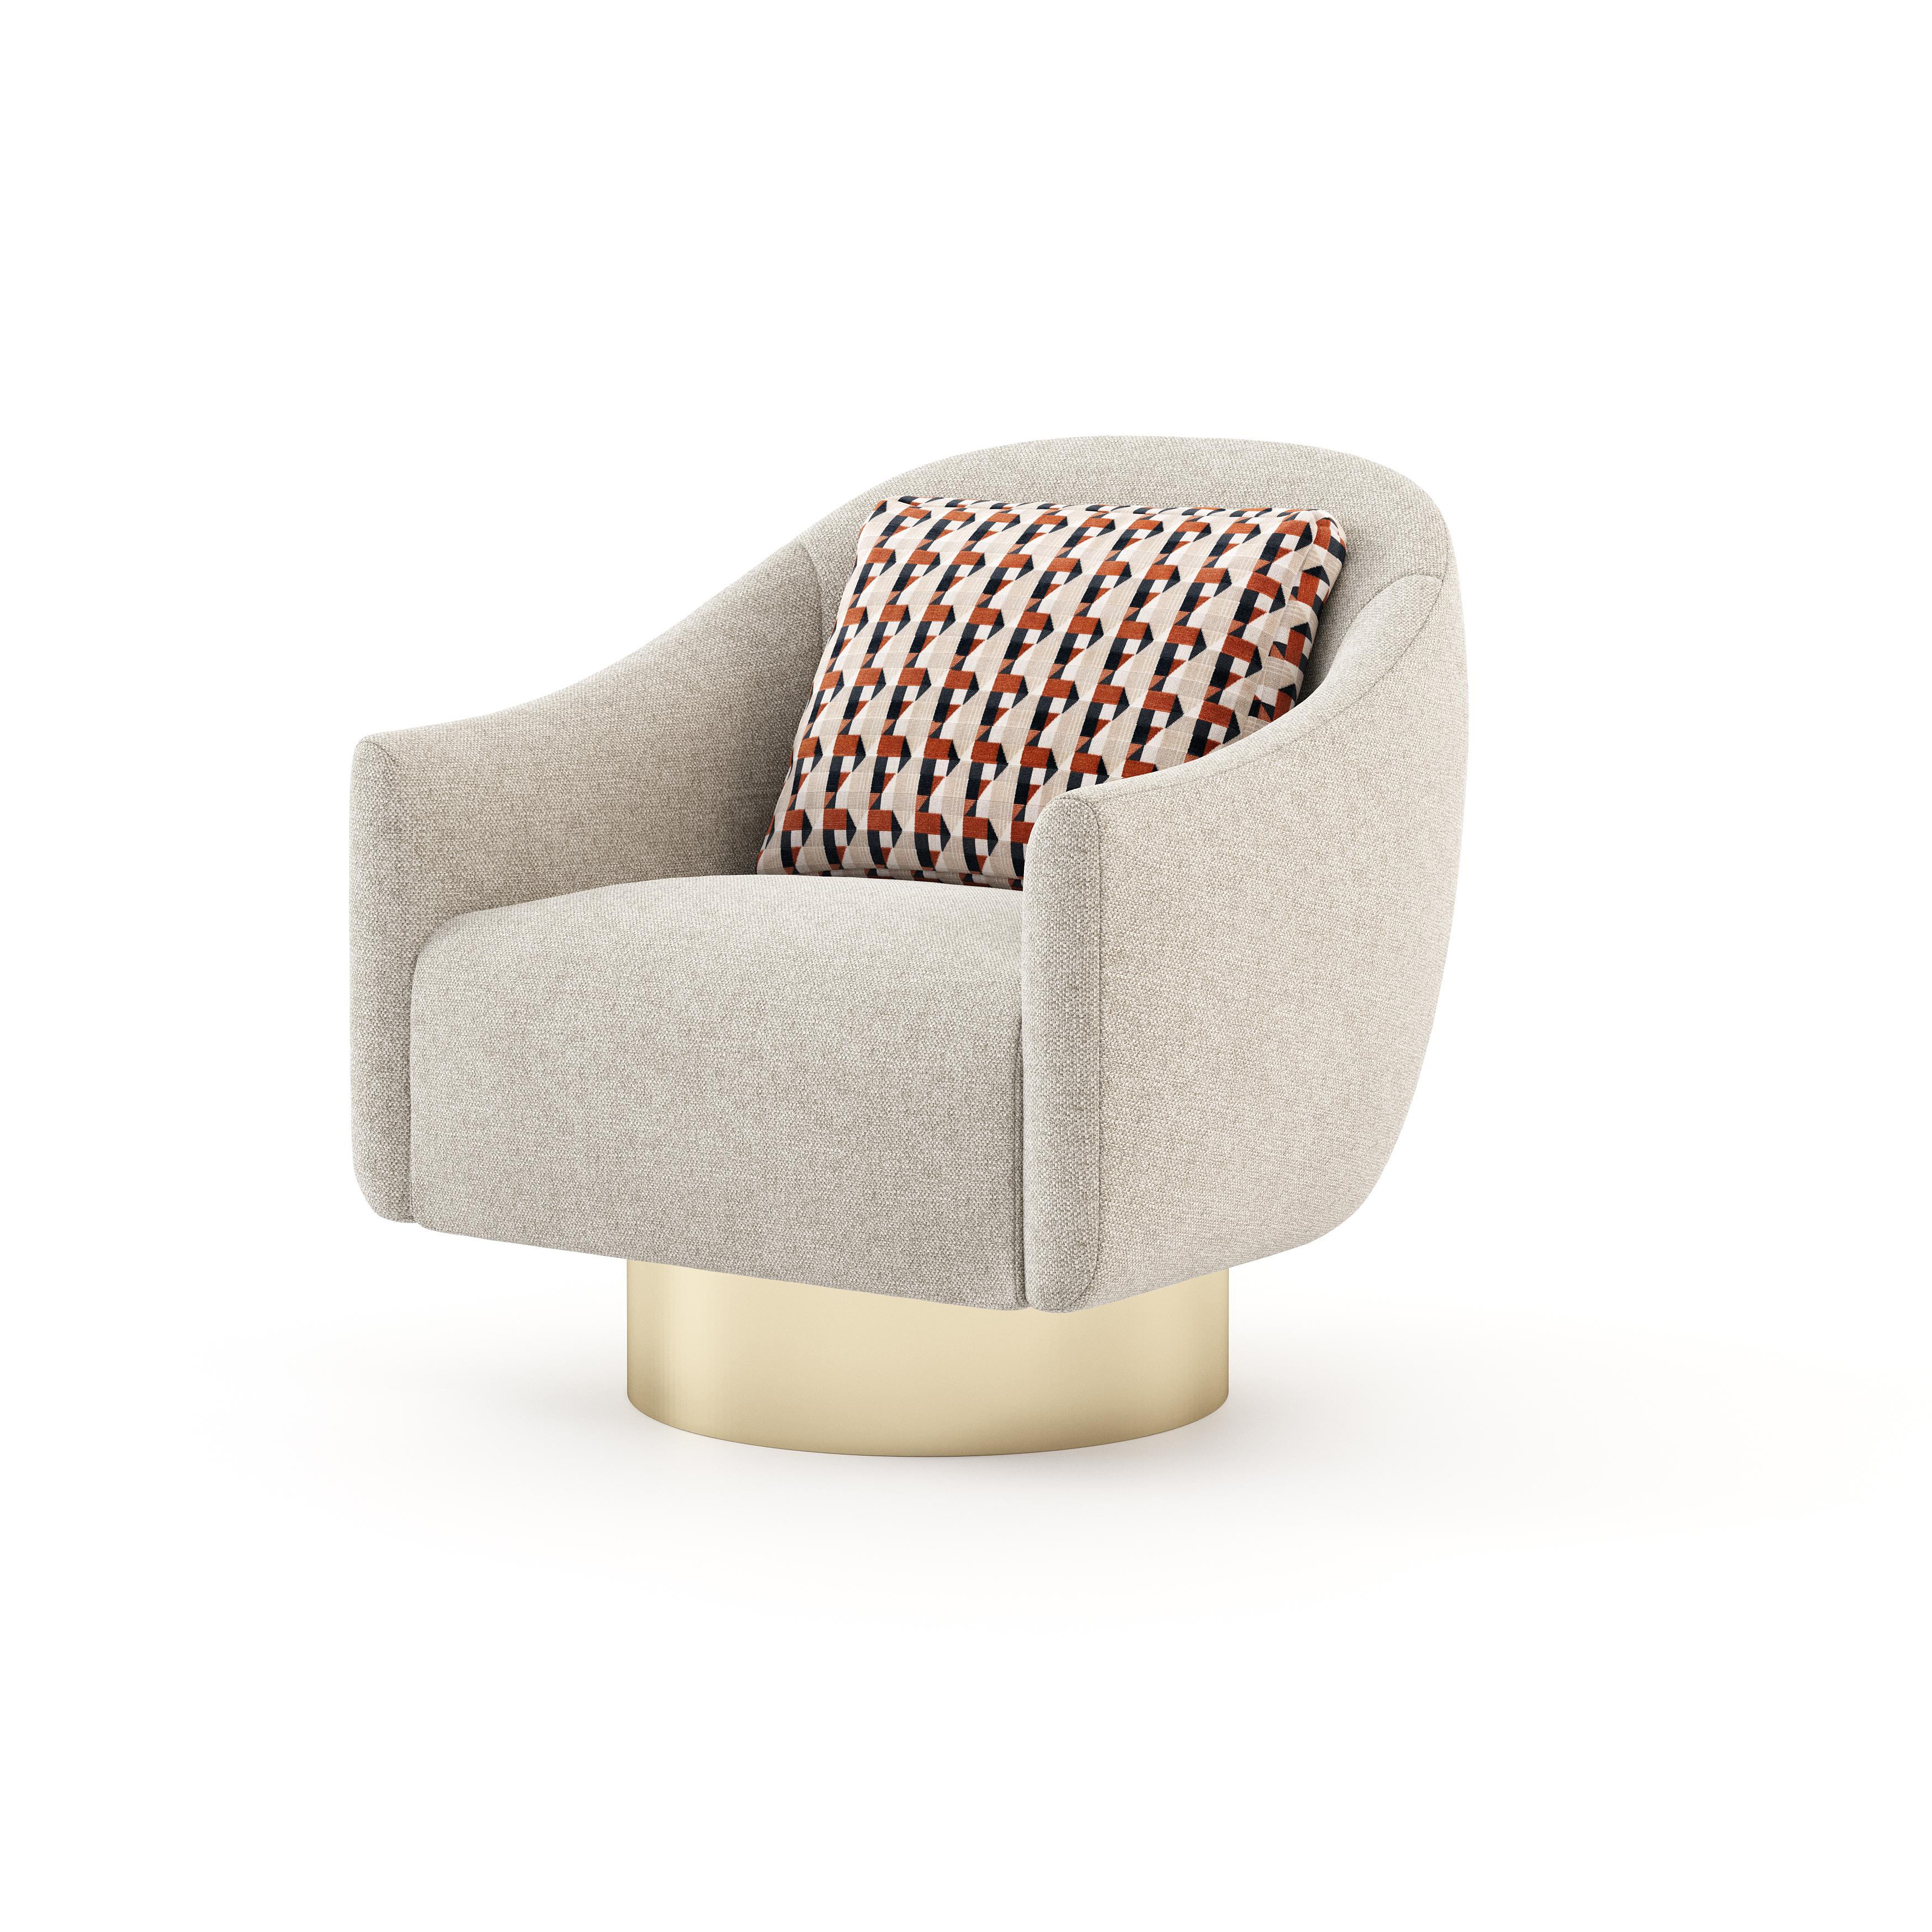 Portuguese 21st-century armchair upholstered with customisable fabric and metallic accents For Sale